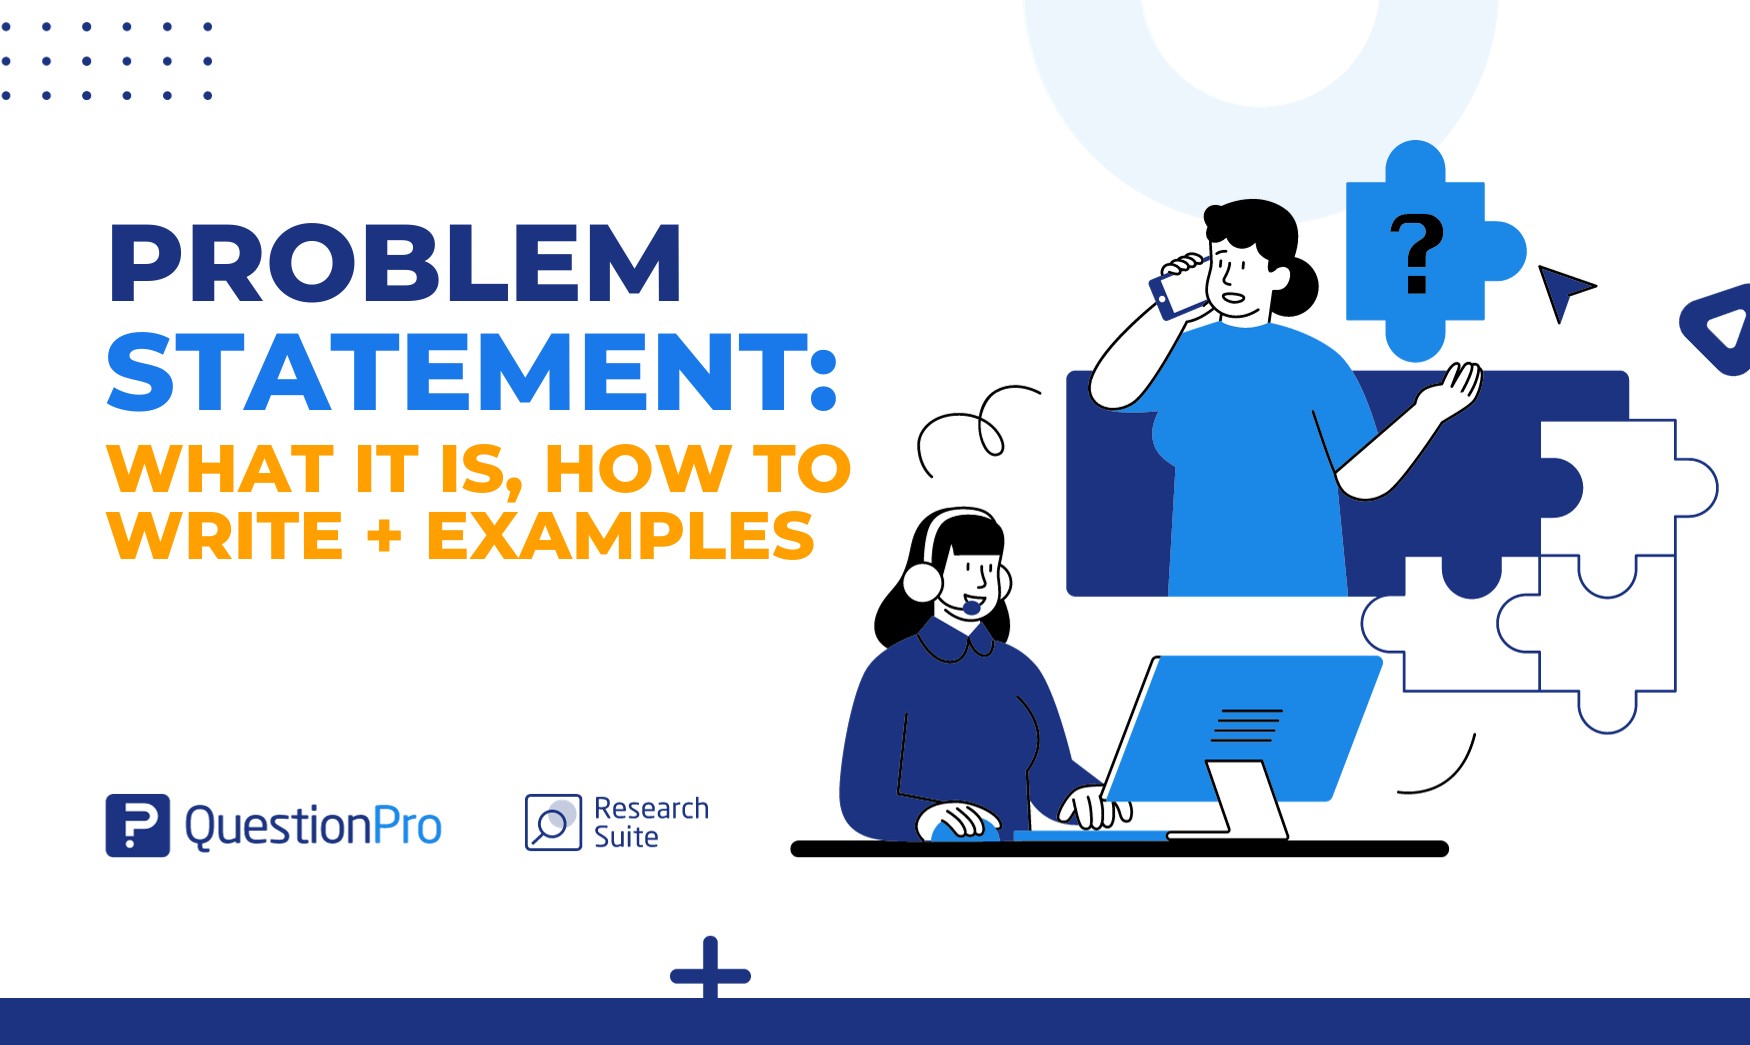 Learn a problem statement, how to craft one effectively, and find practical examples. Master the art of problem statement writing.